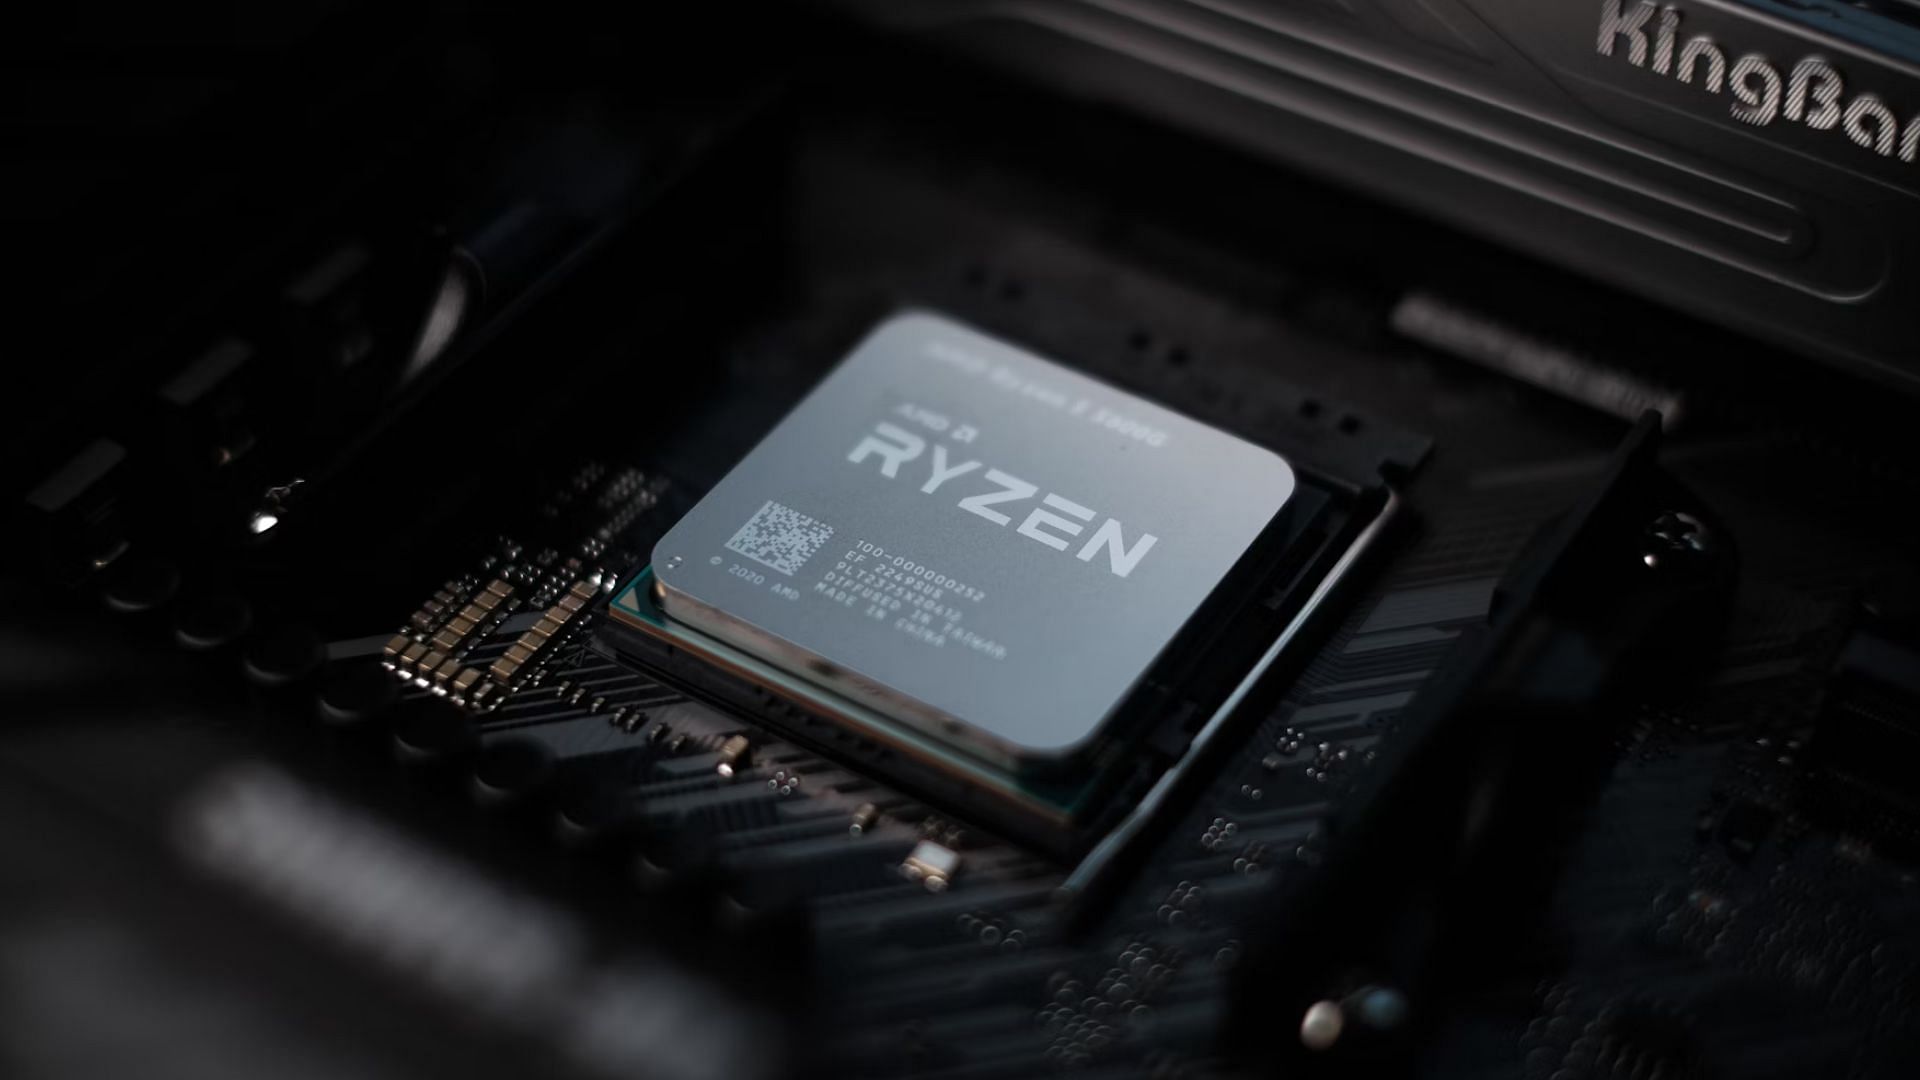 Both X3D chips are capable of handling modern AAA titles at high resolution (Image via Unsplash/Dong xu)